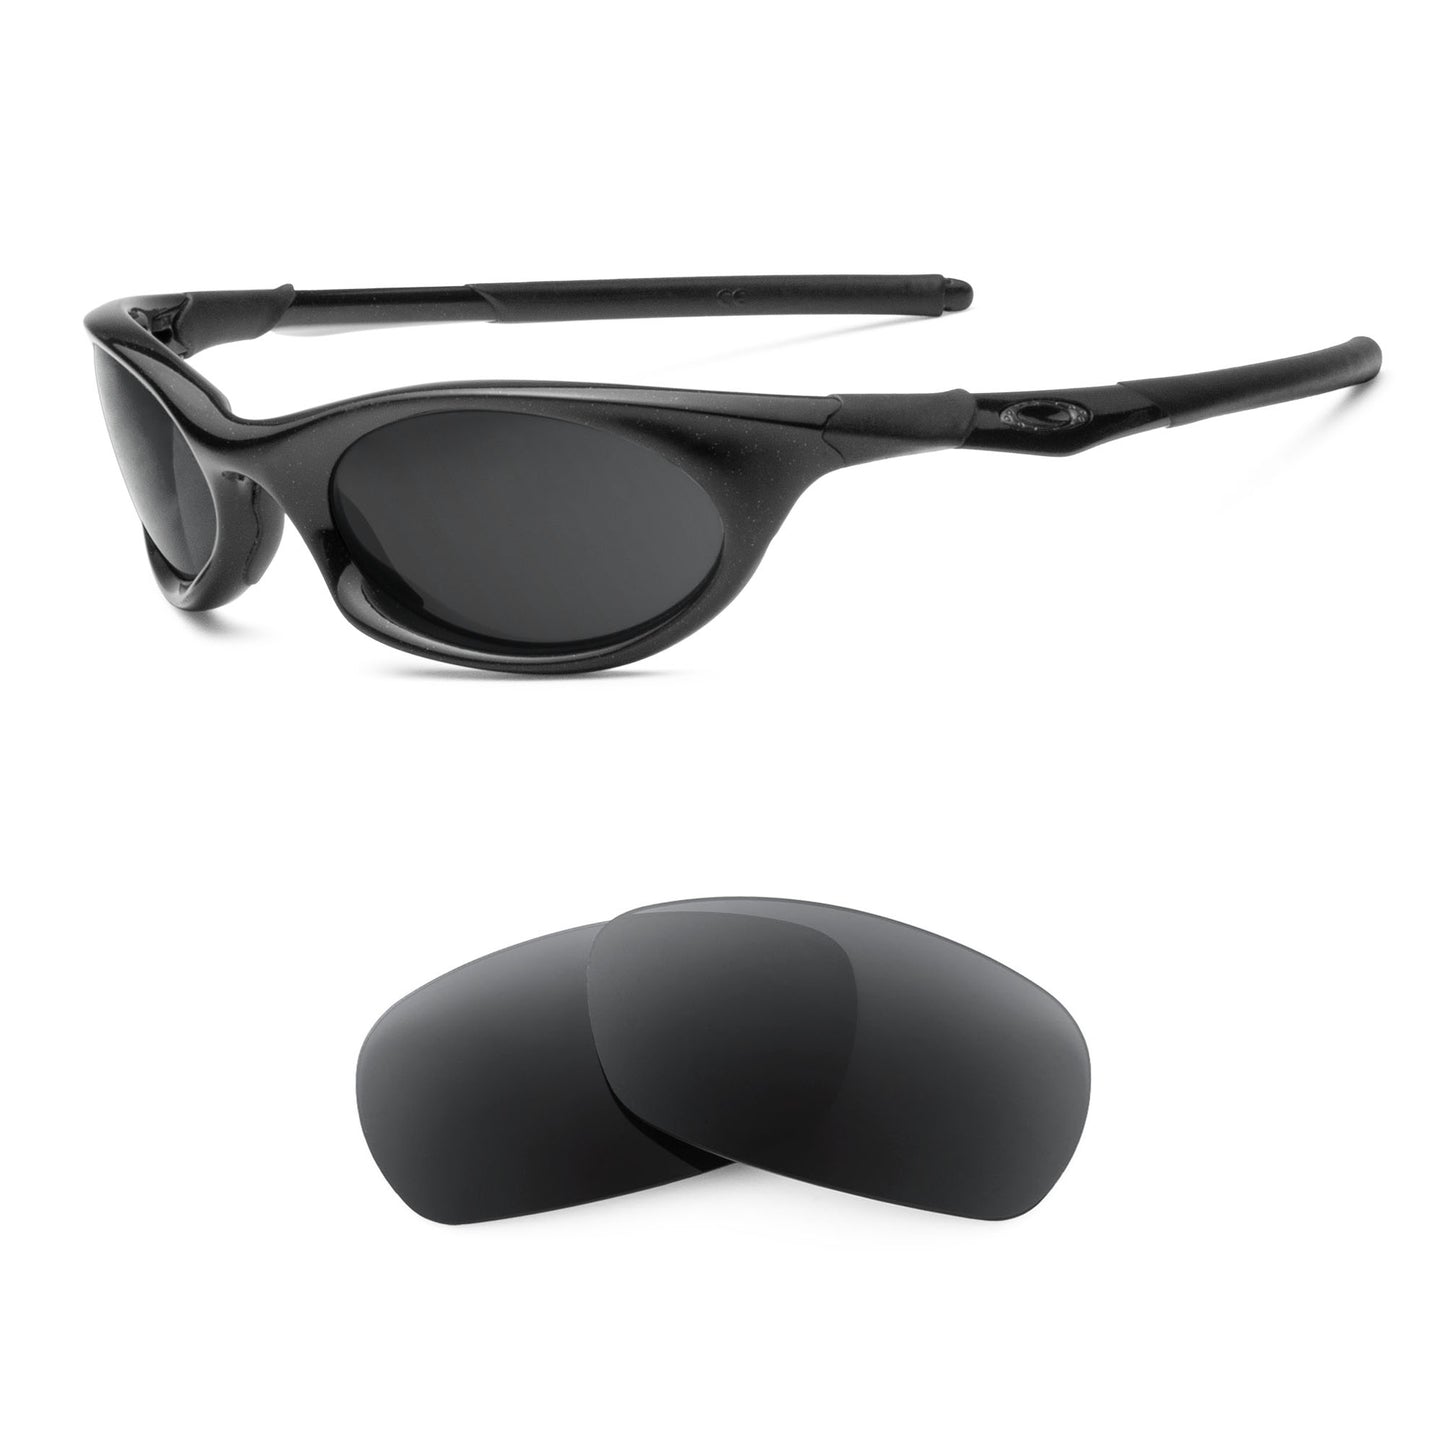 Oakley Eye Jacket 3.0 sunglasses with replacement lenses